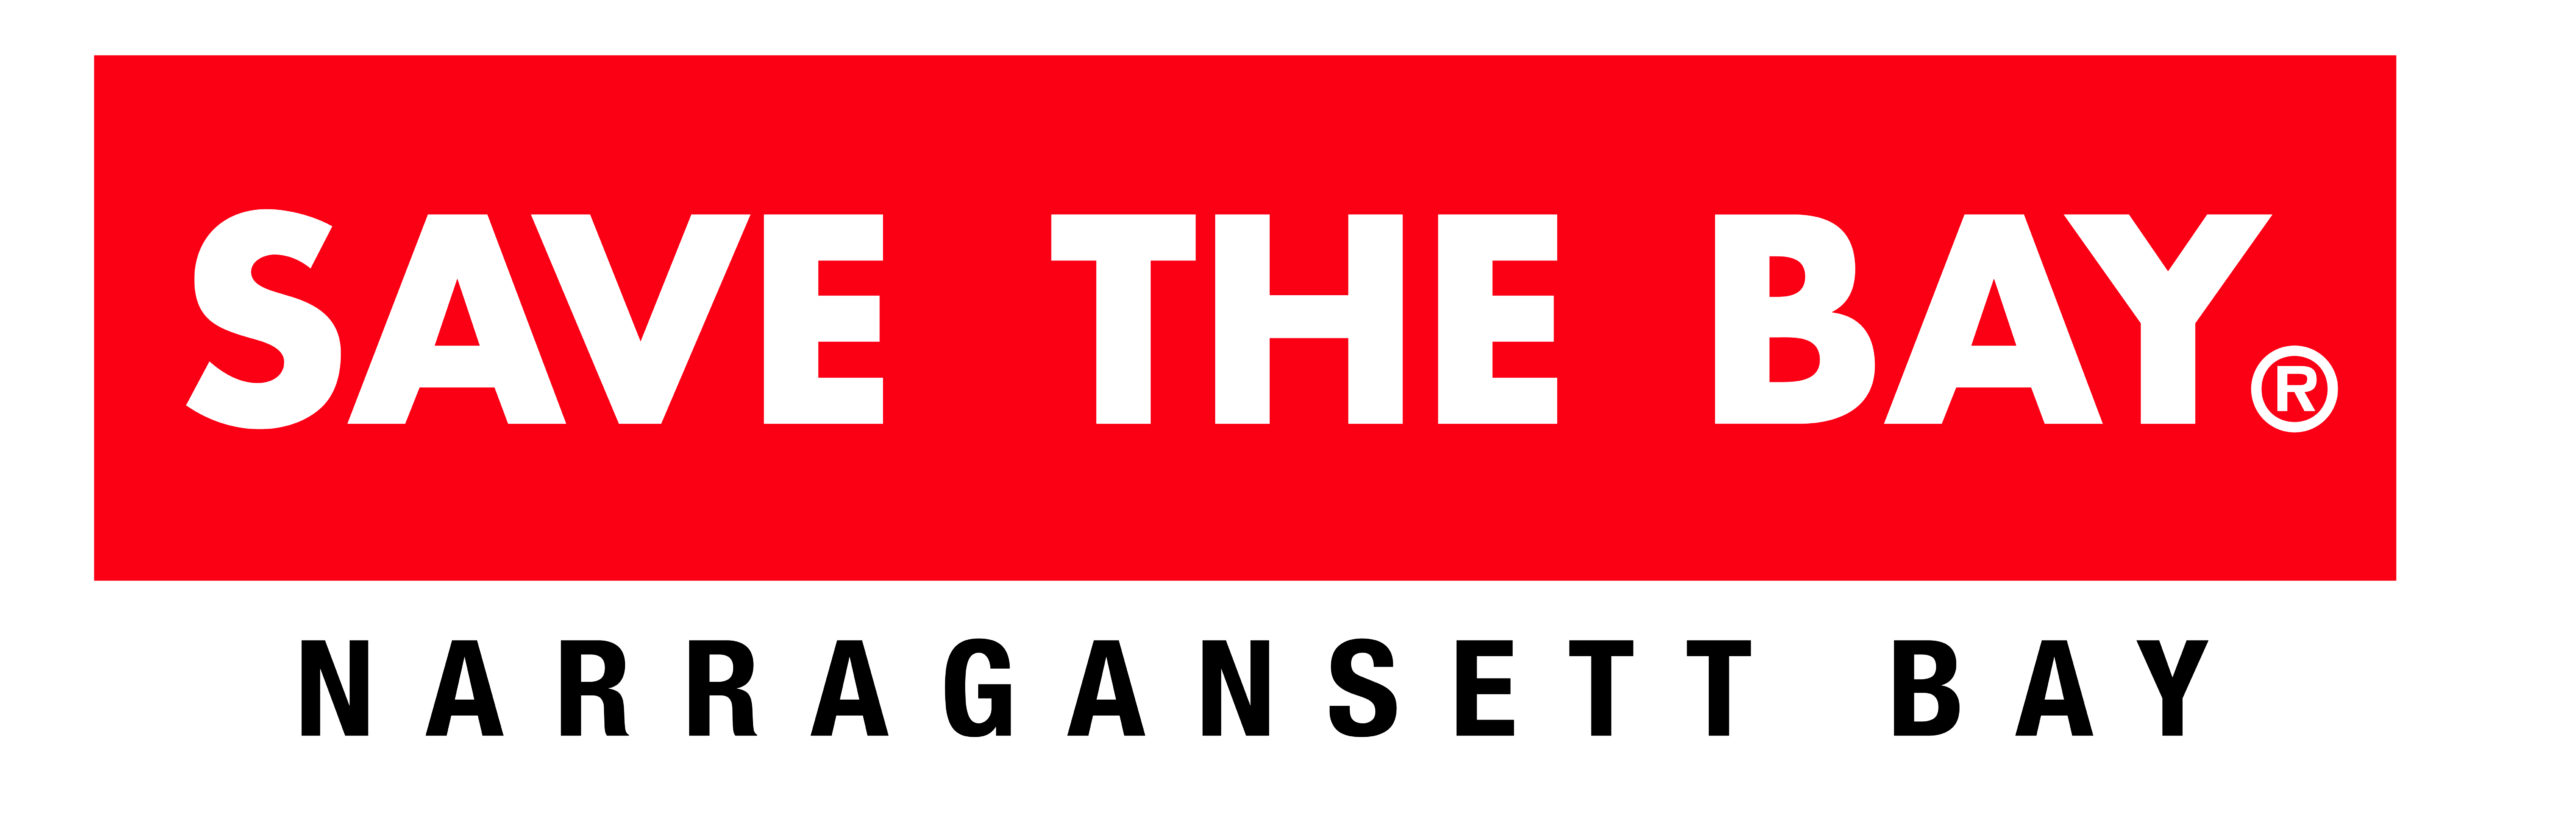 Save The Bay's logo. White text reading "Save The Bay" in all caps on a bright red banner, with the words, "Narragansett Bay" in black, on a white background, below.